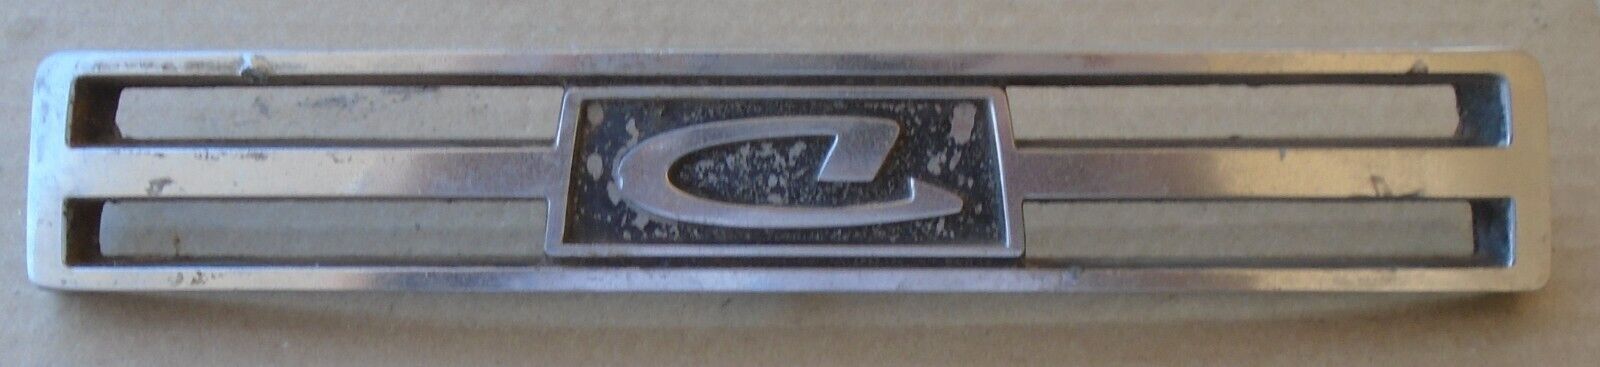 Vintage 1967-68-69-70 Datsun Roadster Grill Name Plate Ornament Badge